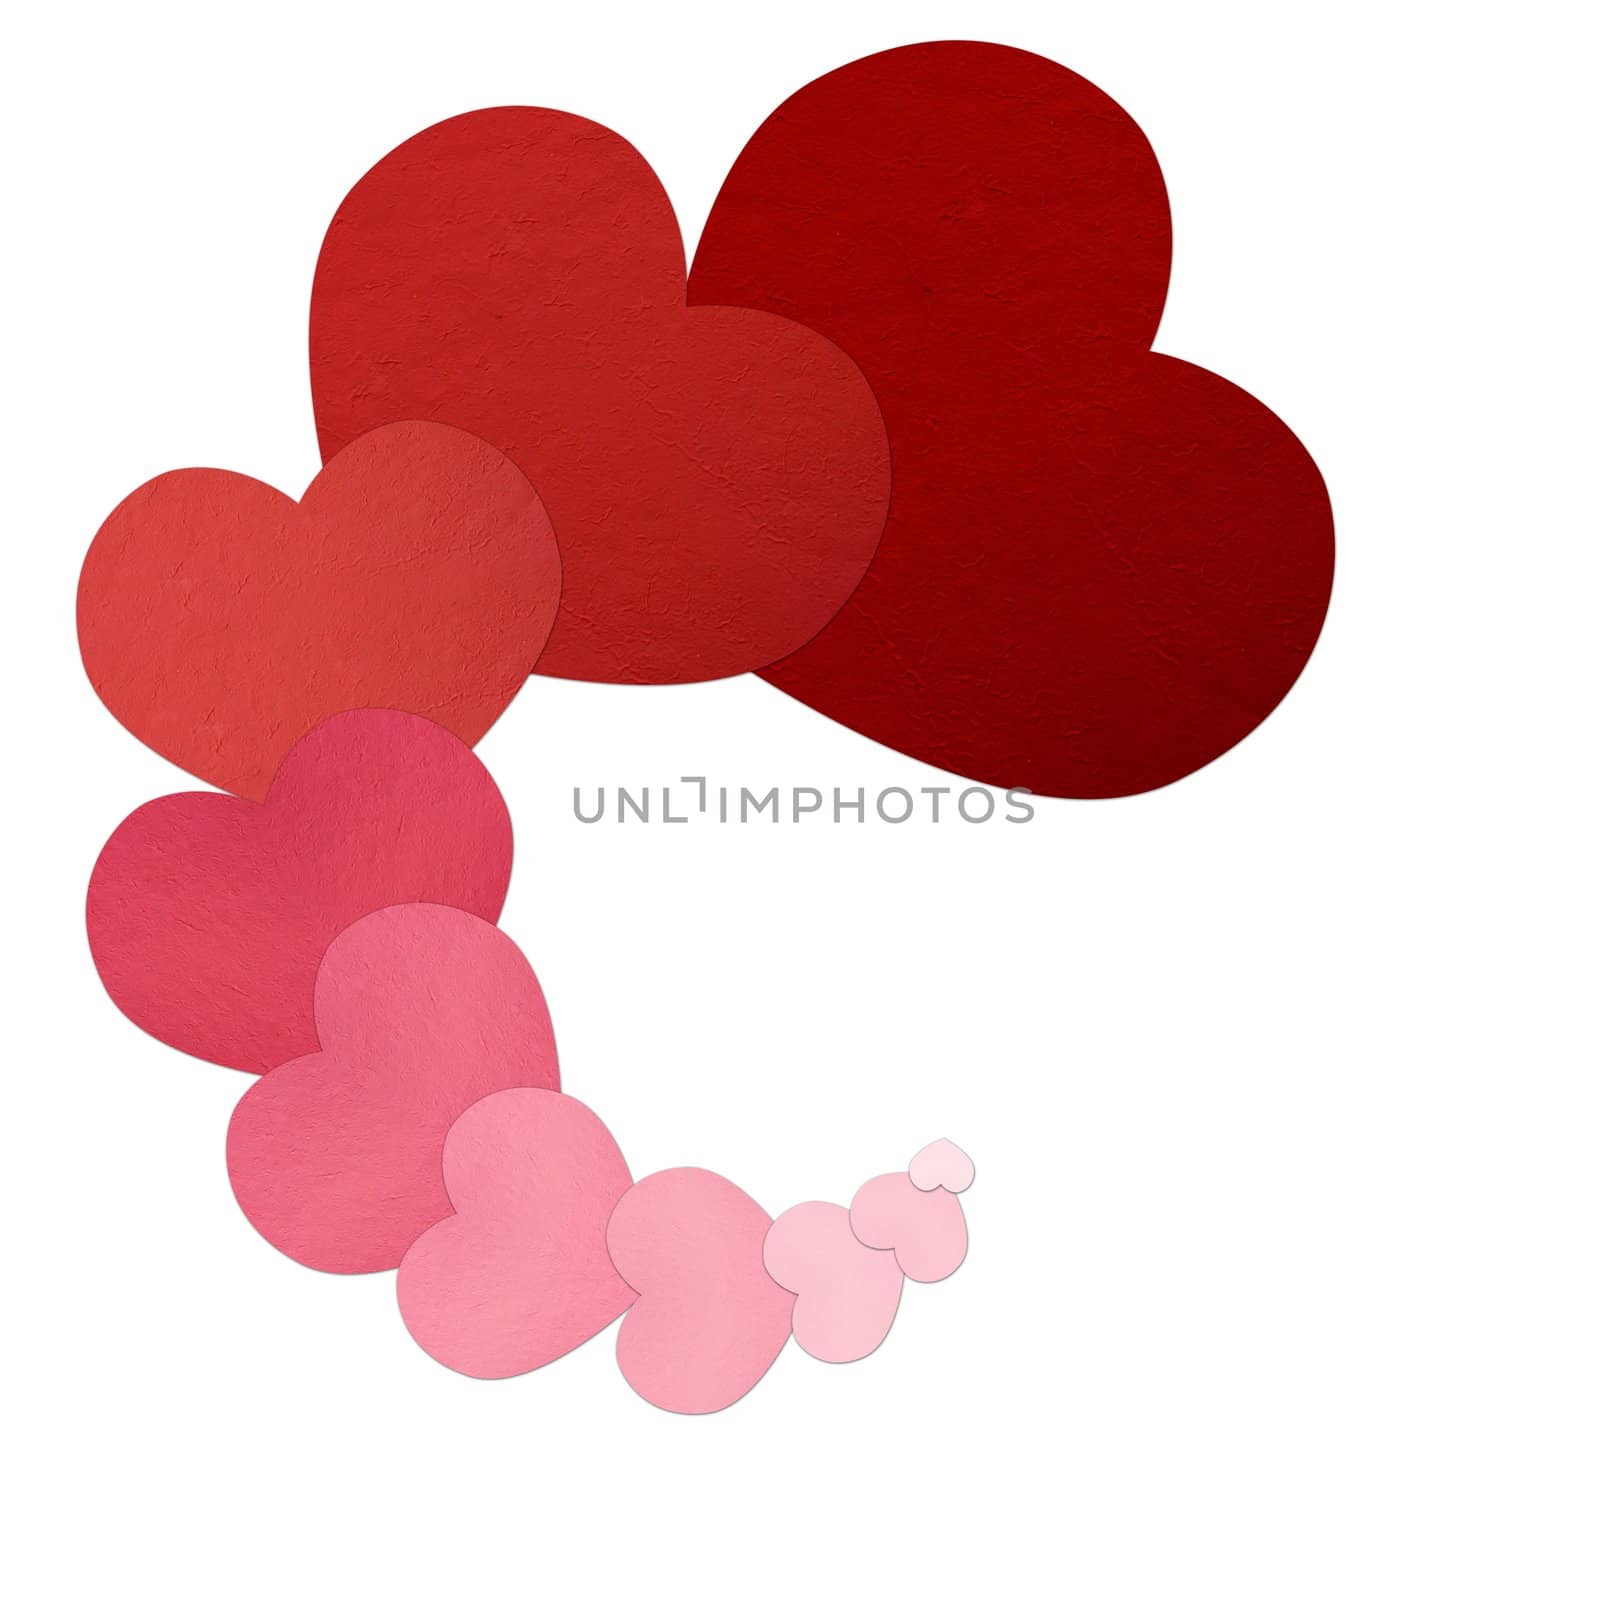 Red love heart on white background.